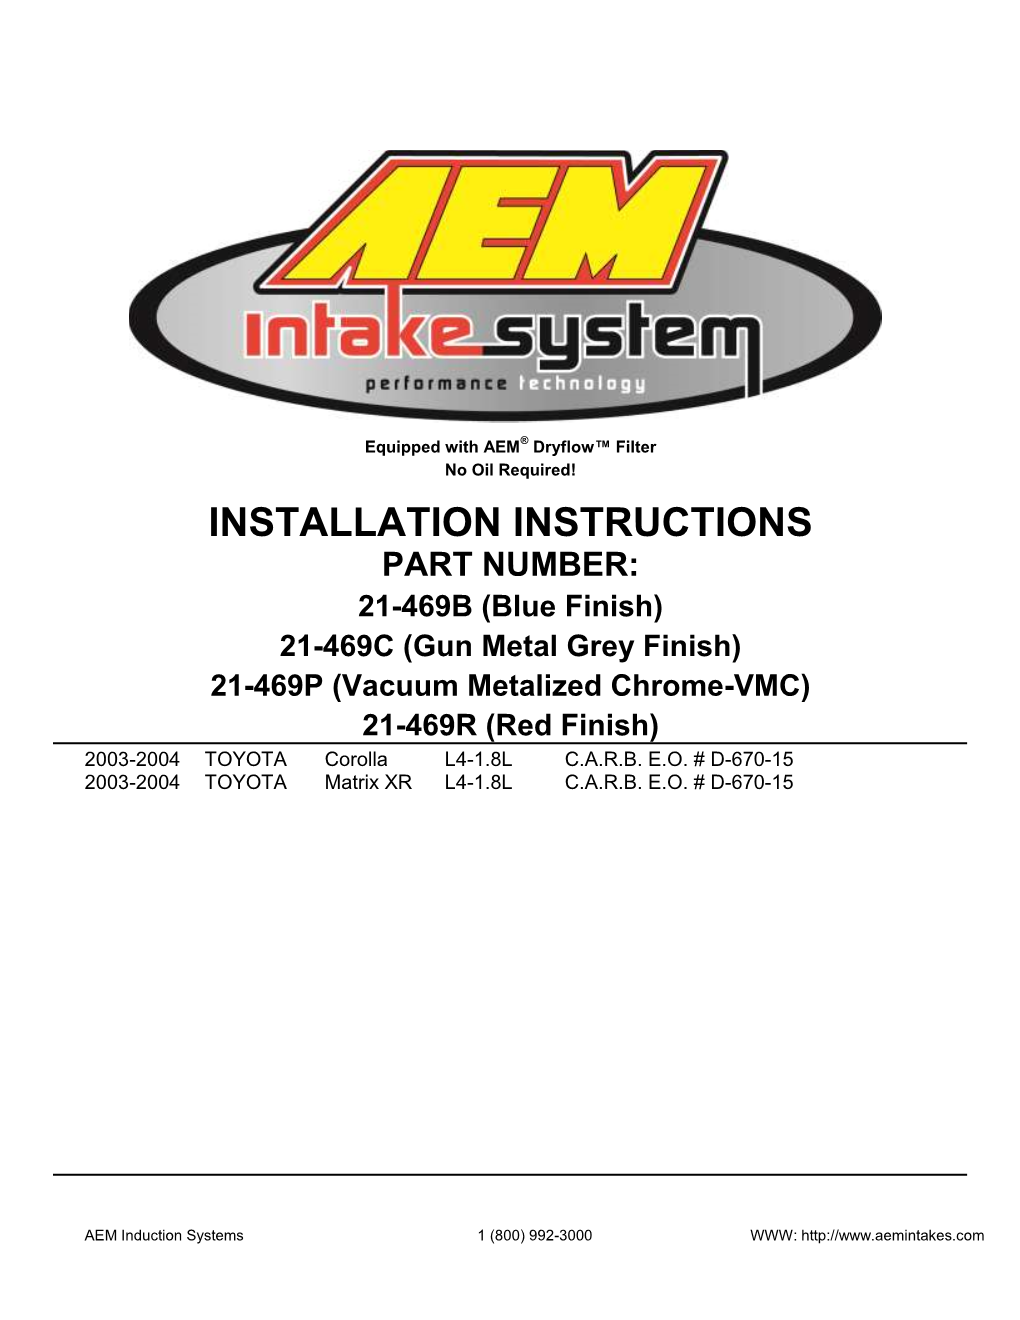 Installation Instructions Part Number